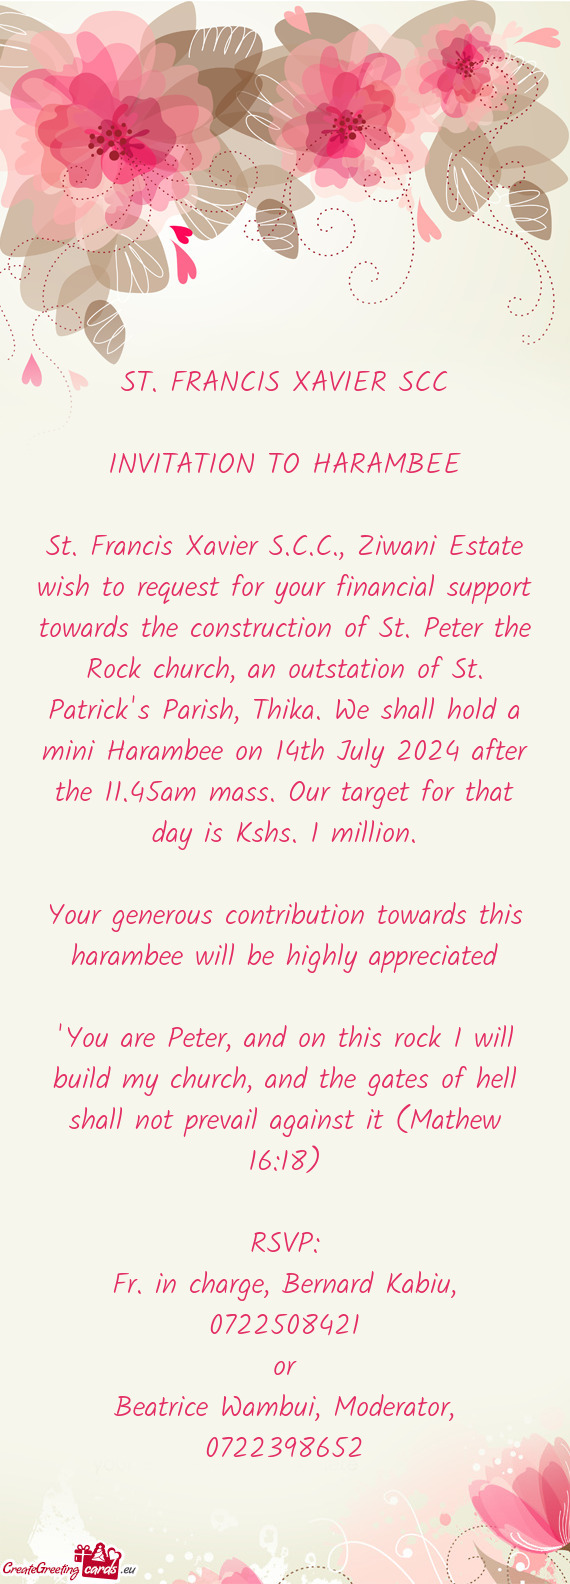 Truction of St. Peter the Rock church, an outstation of St. Patrick's Parish, Thika. We shall hold a